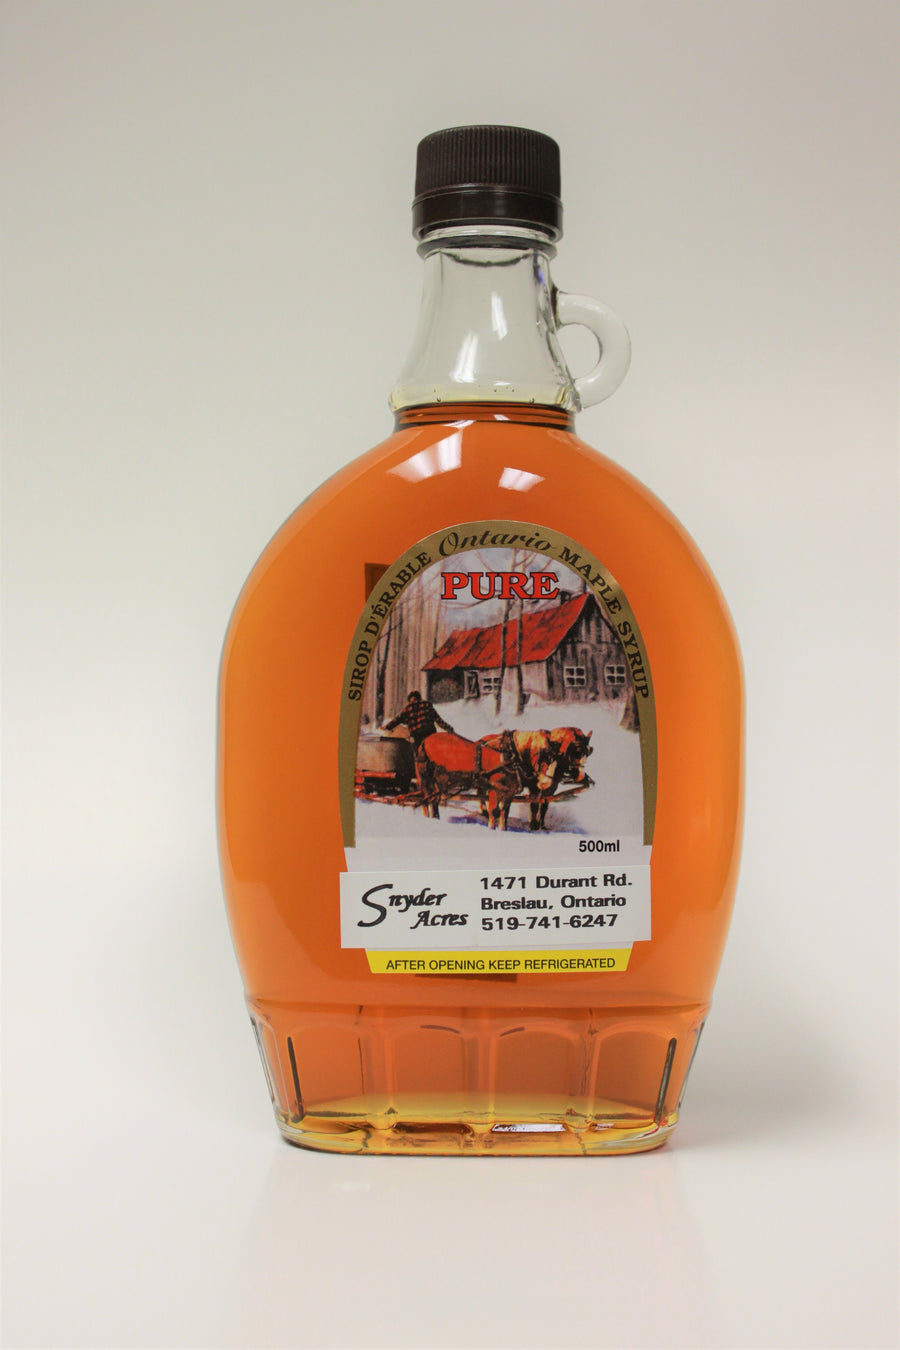 Snyder Acres Maple Syrup